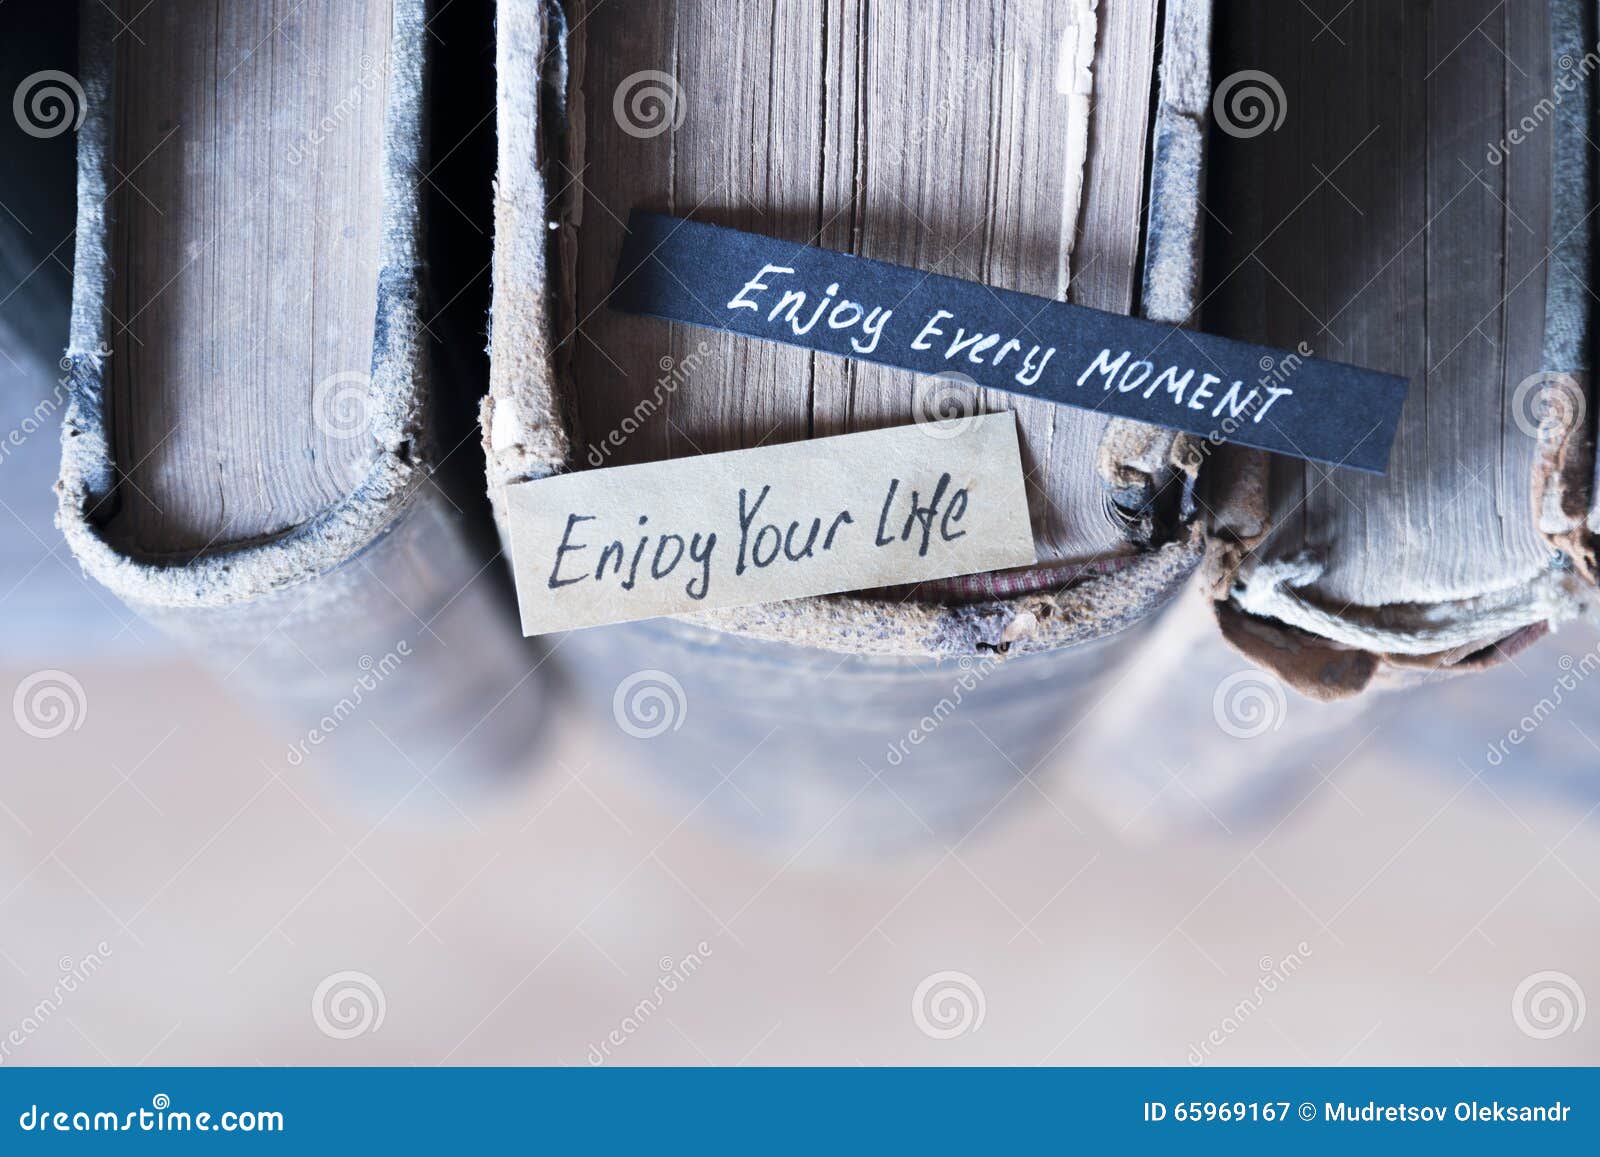 Royalty Free Stock Download Enjoy Every Moment And Enjoy Your Life